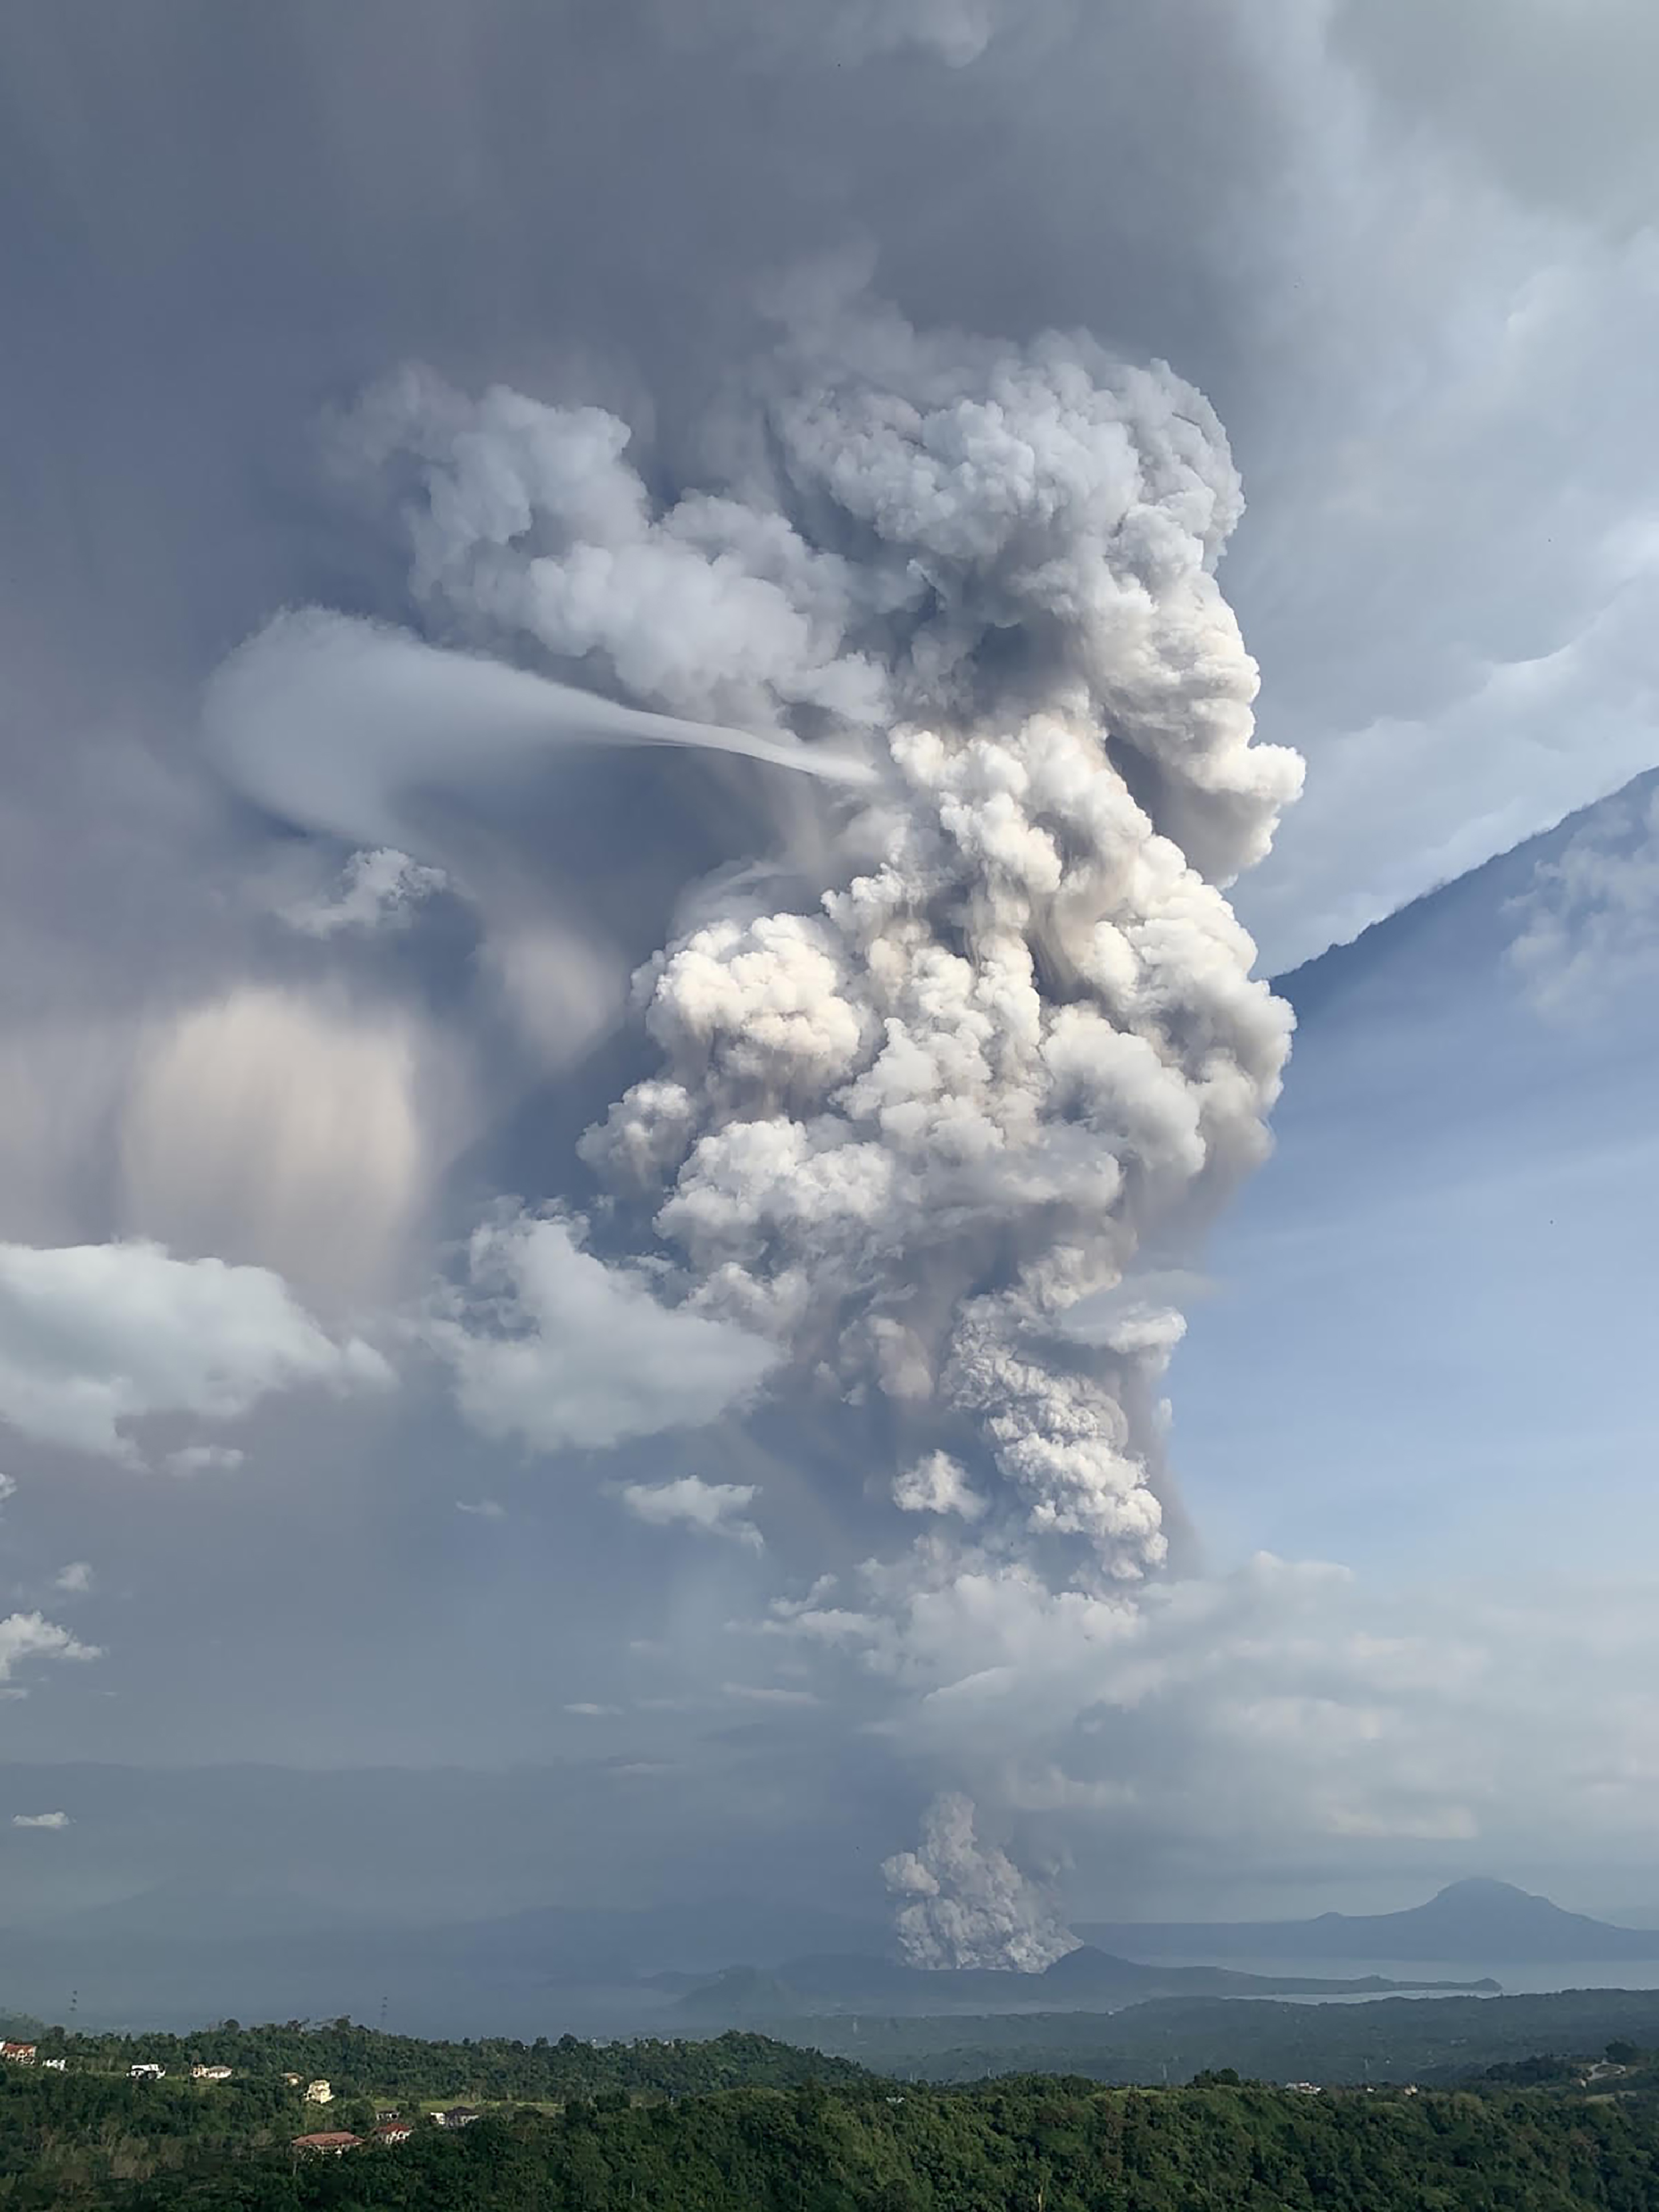 case study about taal volcano eruption